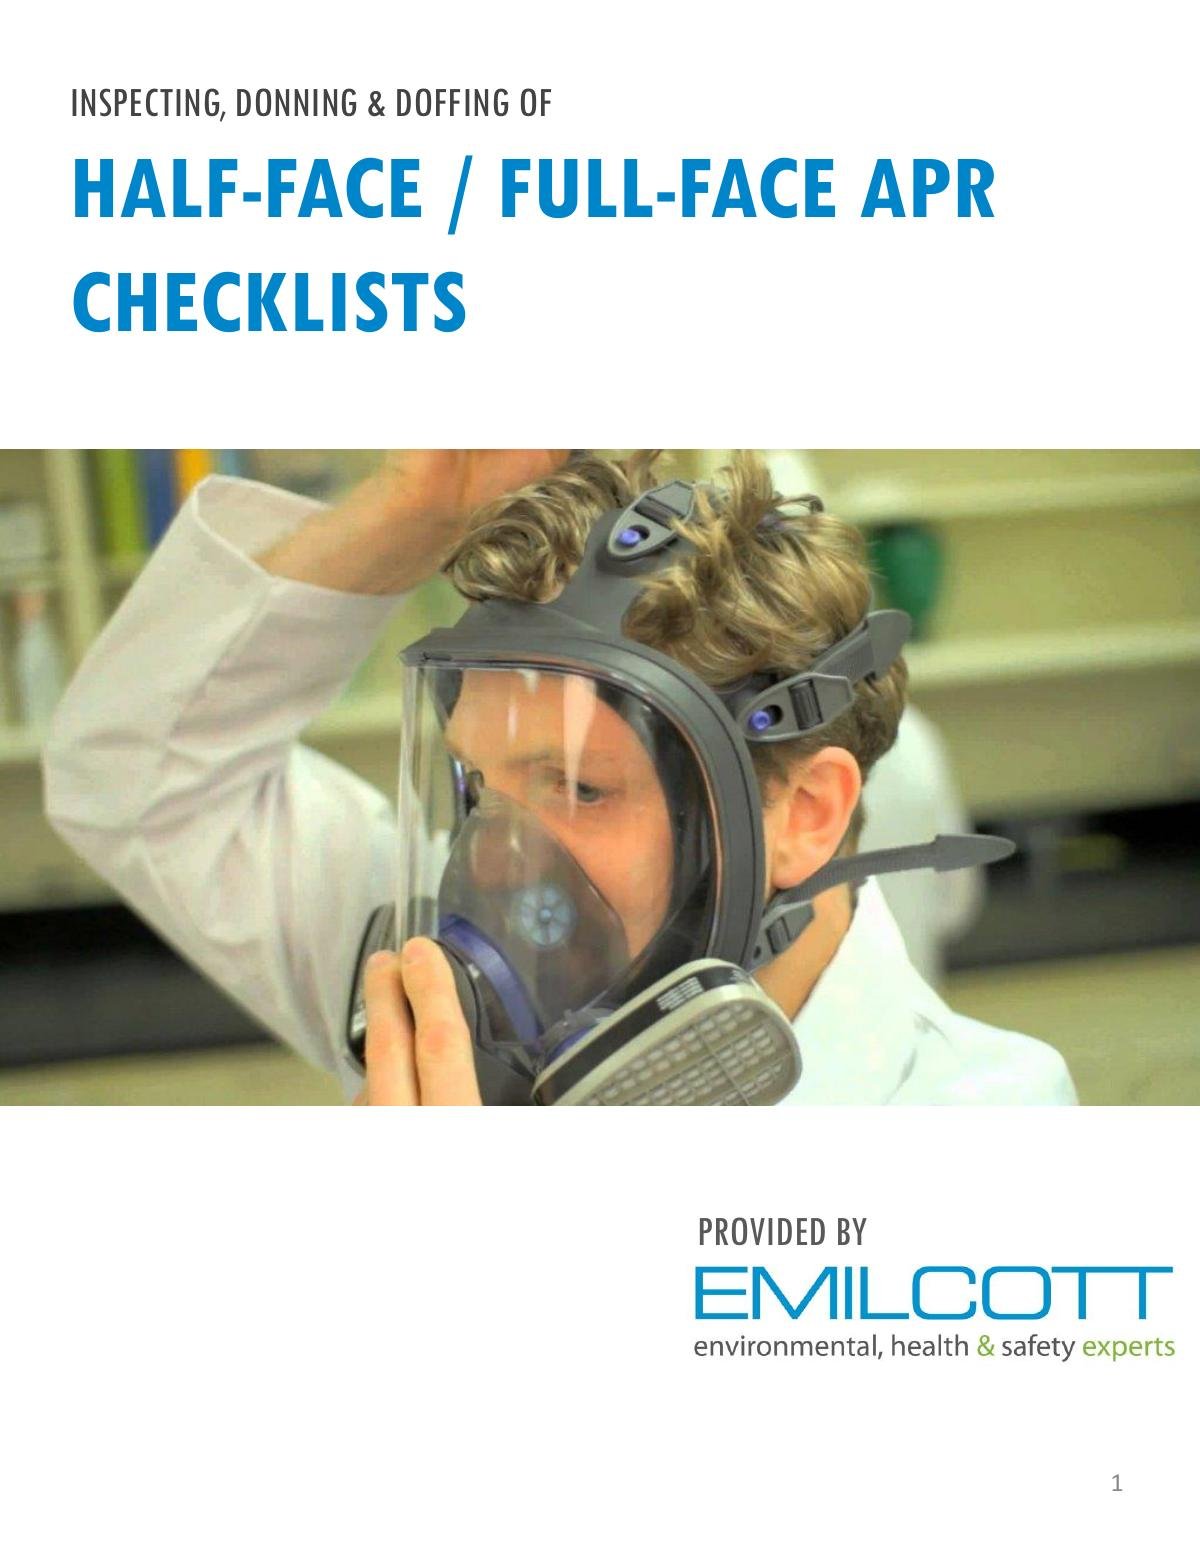 Respirator Inspection Checklist with Proper Donning & Doffing Steps